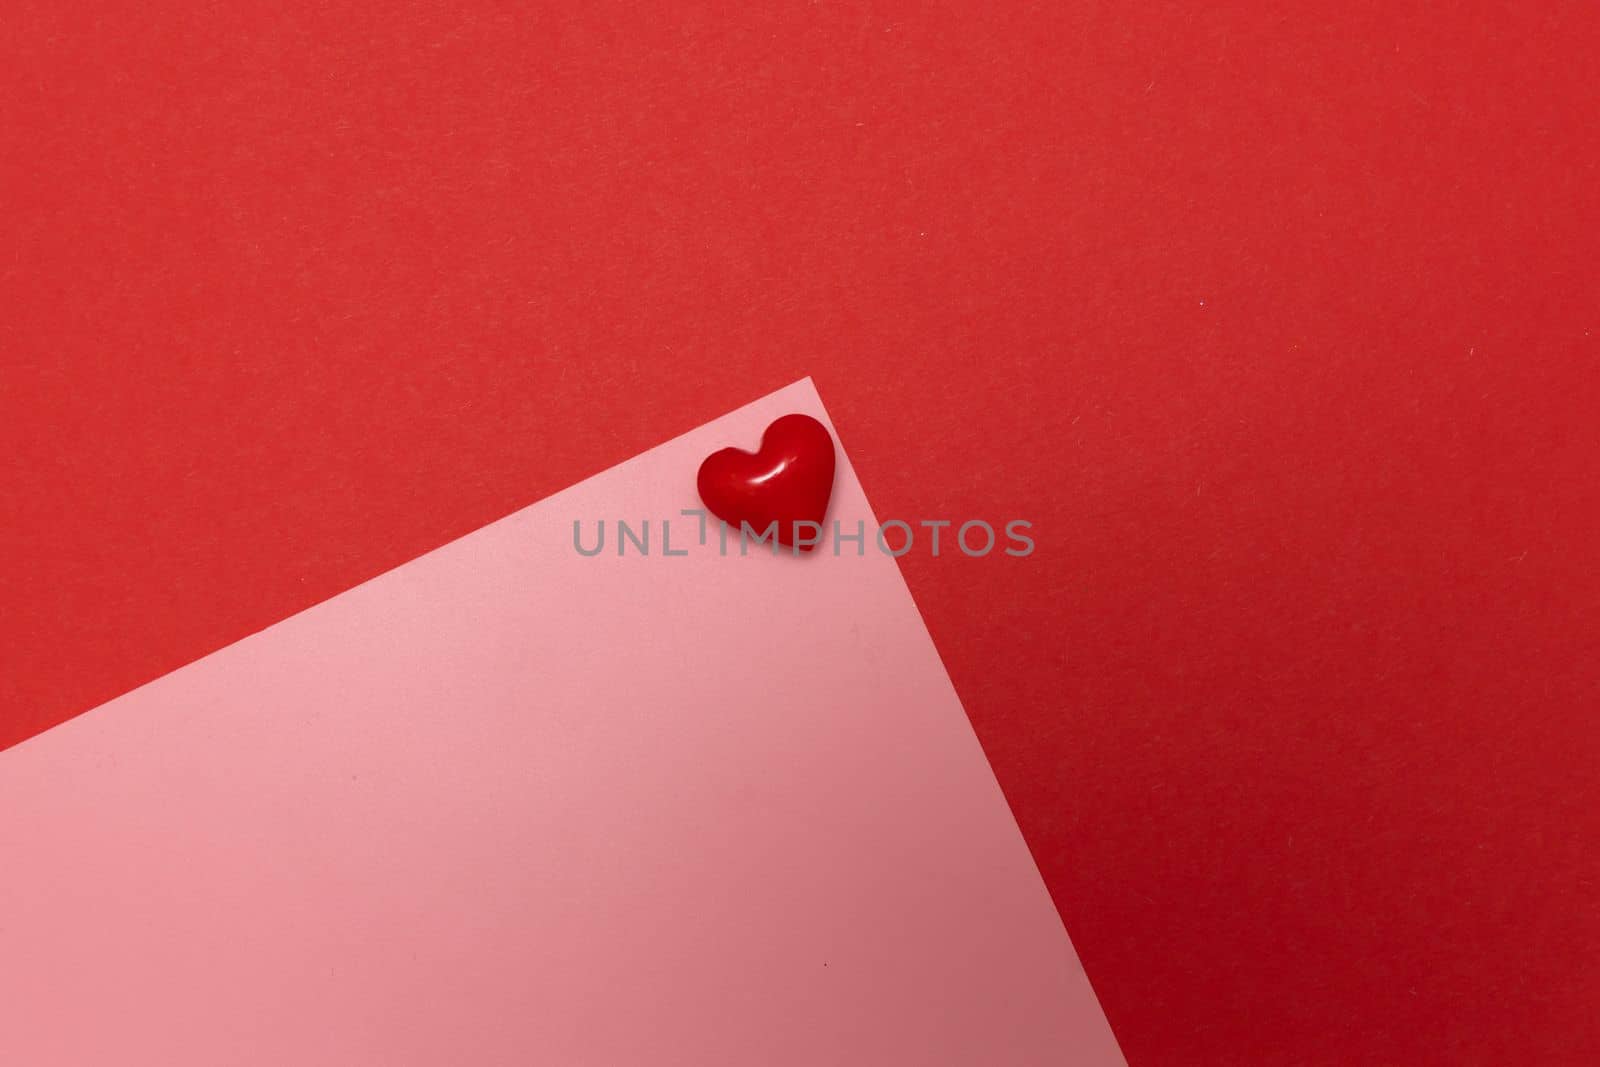 Valentines day red heart on pink dots envelope. Vivid color. Valentine's day concept. Copy space. Space for text. by Ri6ka